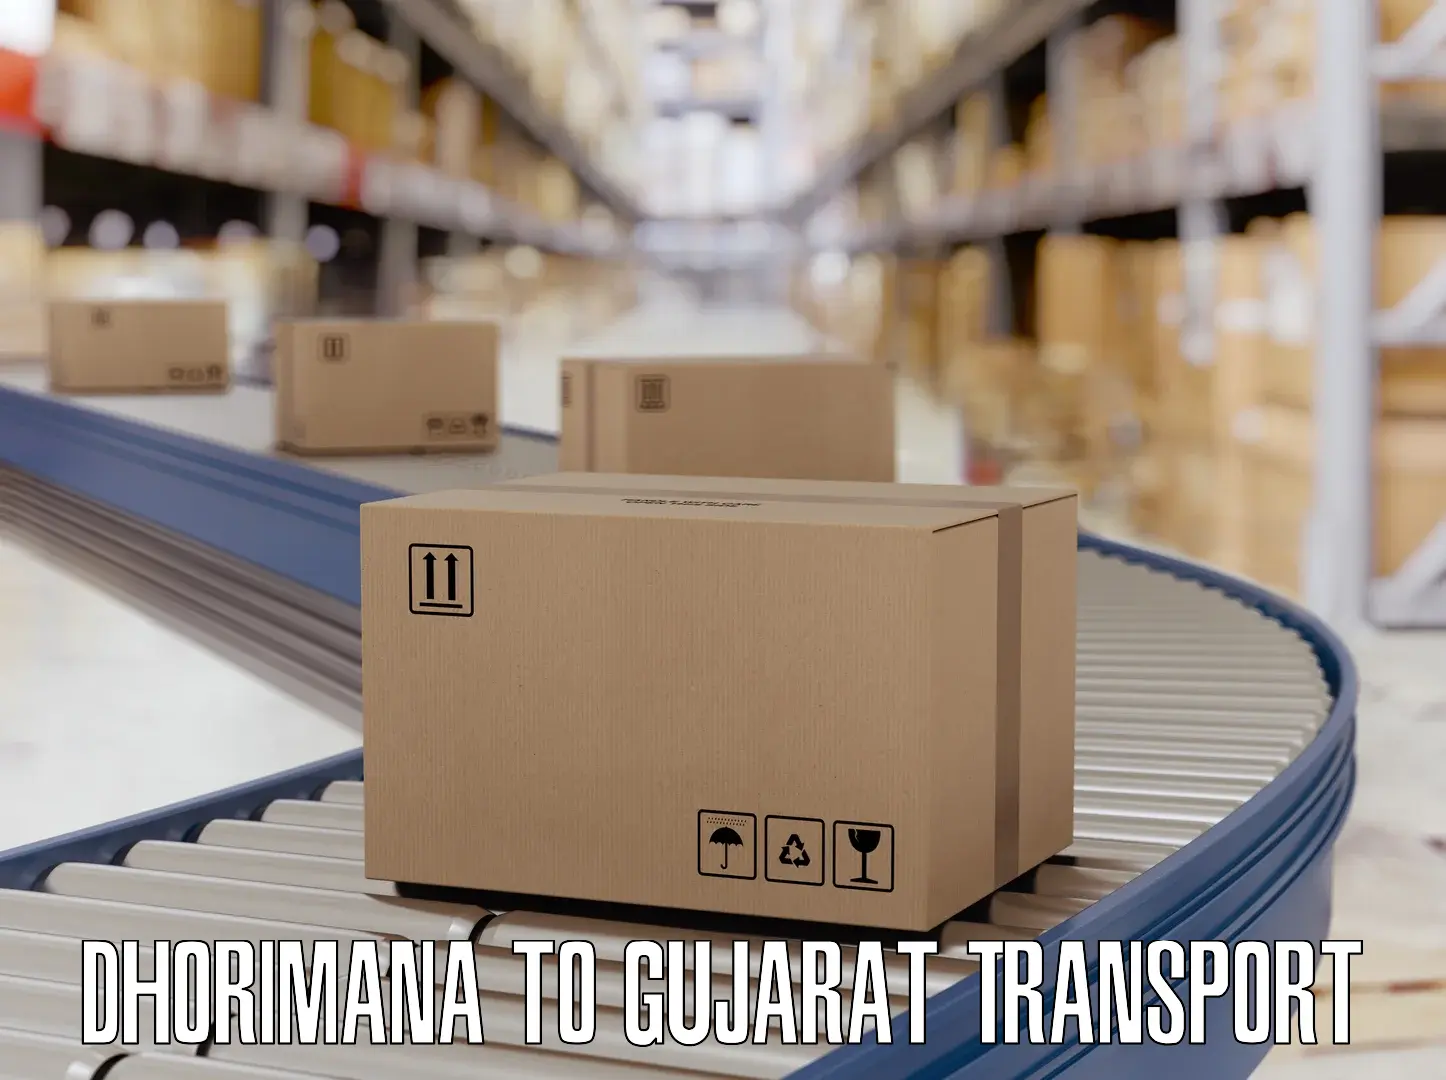 Parcel transport services Dhorimana to Dhasa